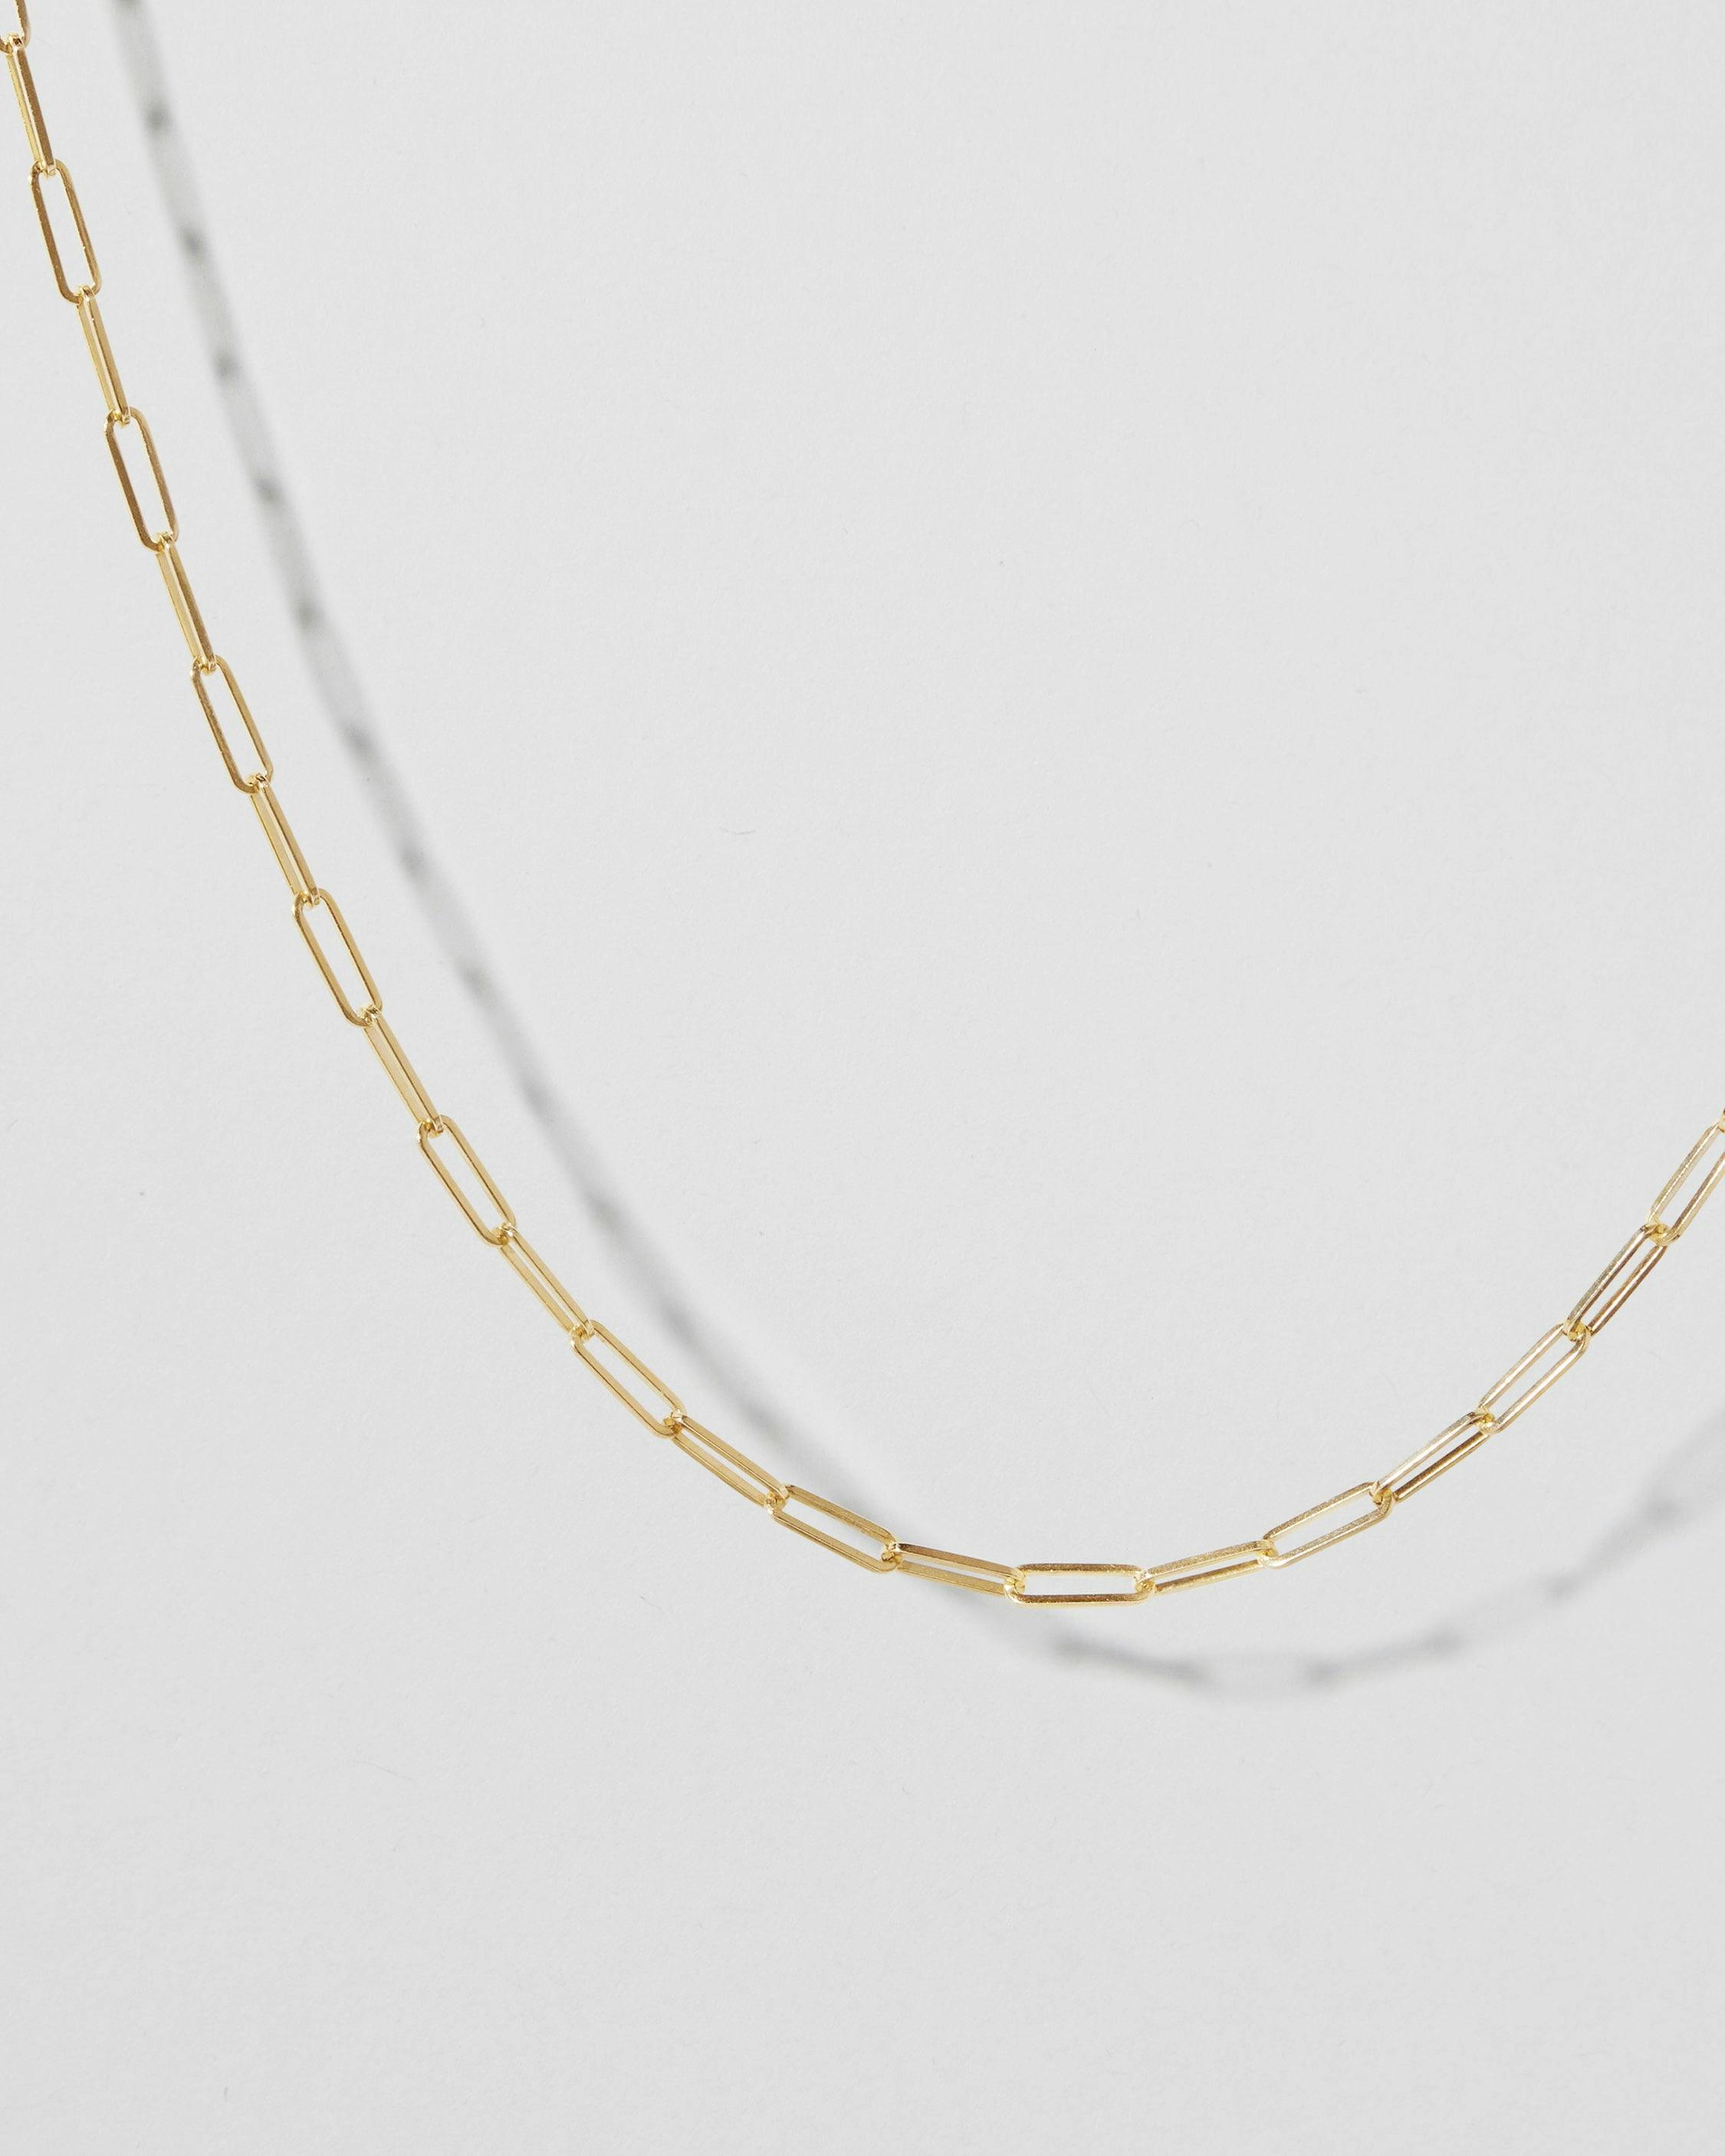 Women's 14K Gold Long Chain Link Necklace in Yellow Gold by Quince